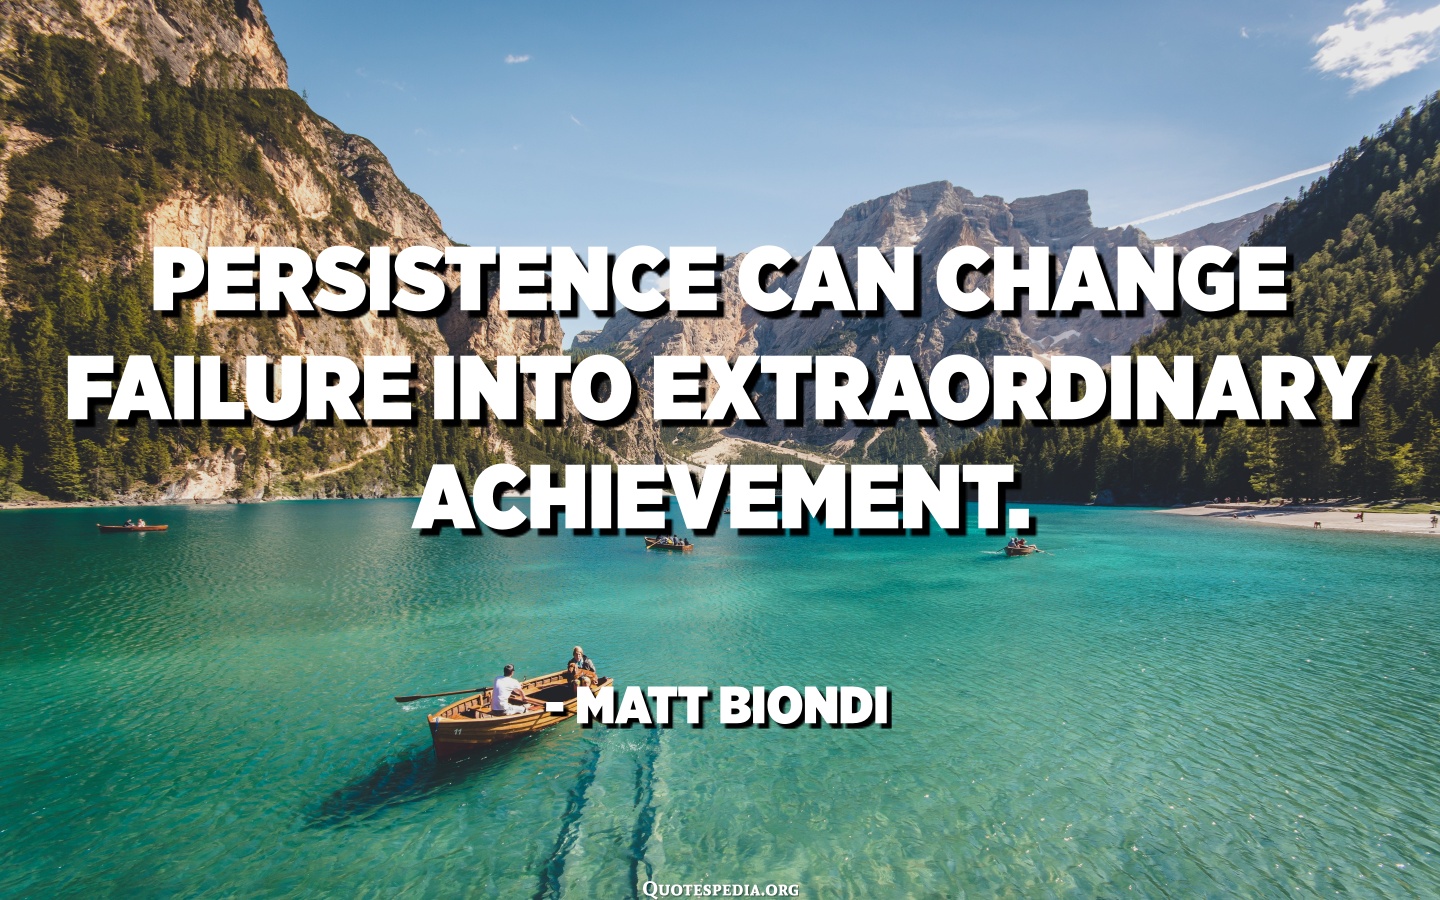 Persistence can change failure into extraordinary achievement